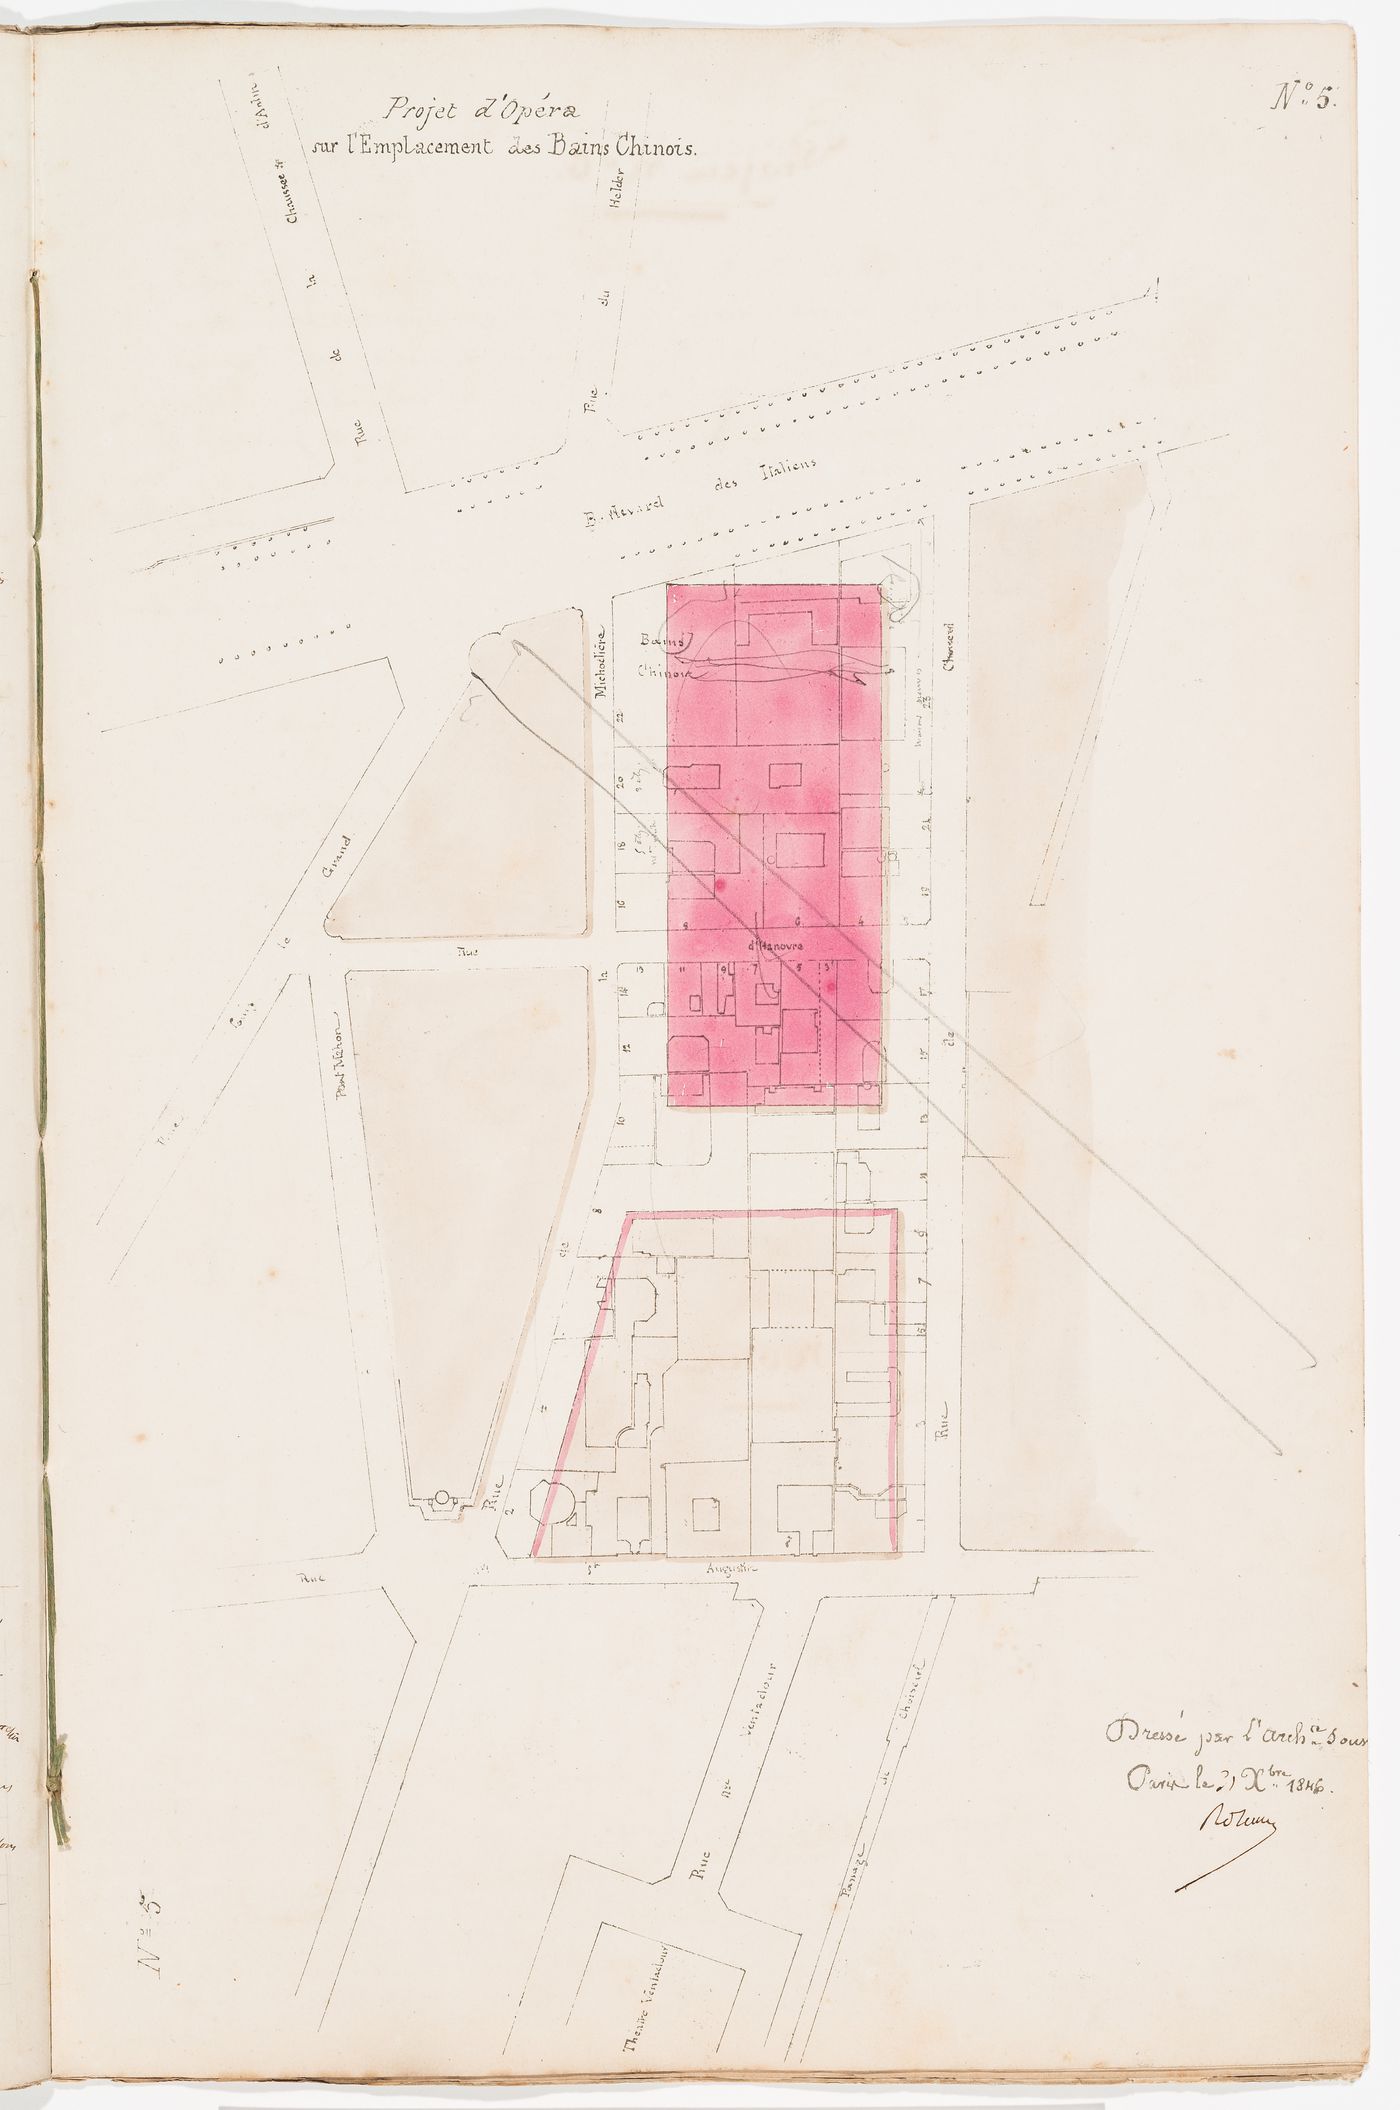 Project no. 5: Site plan for an opera house for the Académie royale de musique on the Bains Chinois site; verso: Project no. 6: Site analysis and cost estimate for an opera house for the Académie royale de musique facing boulevard des Capucines